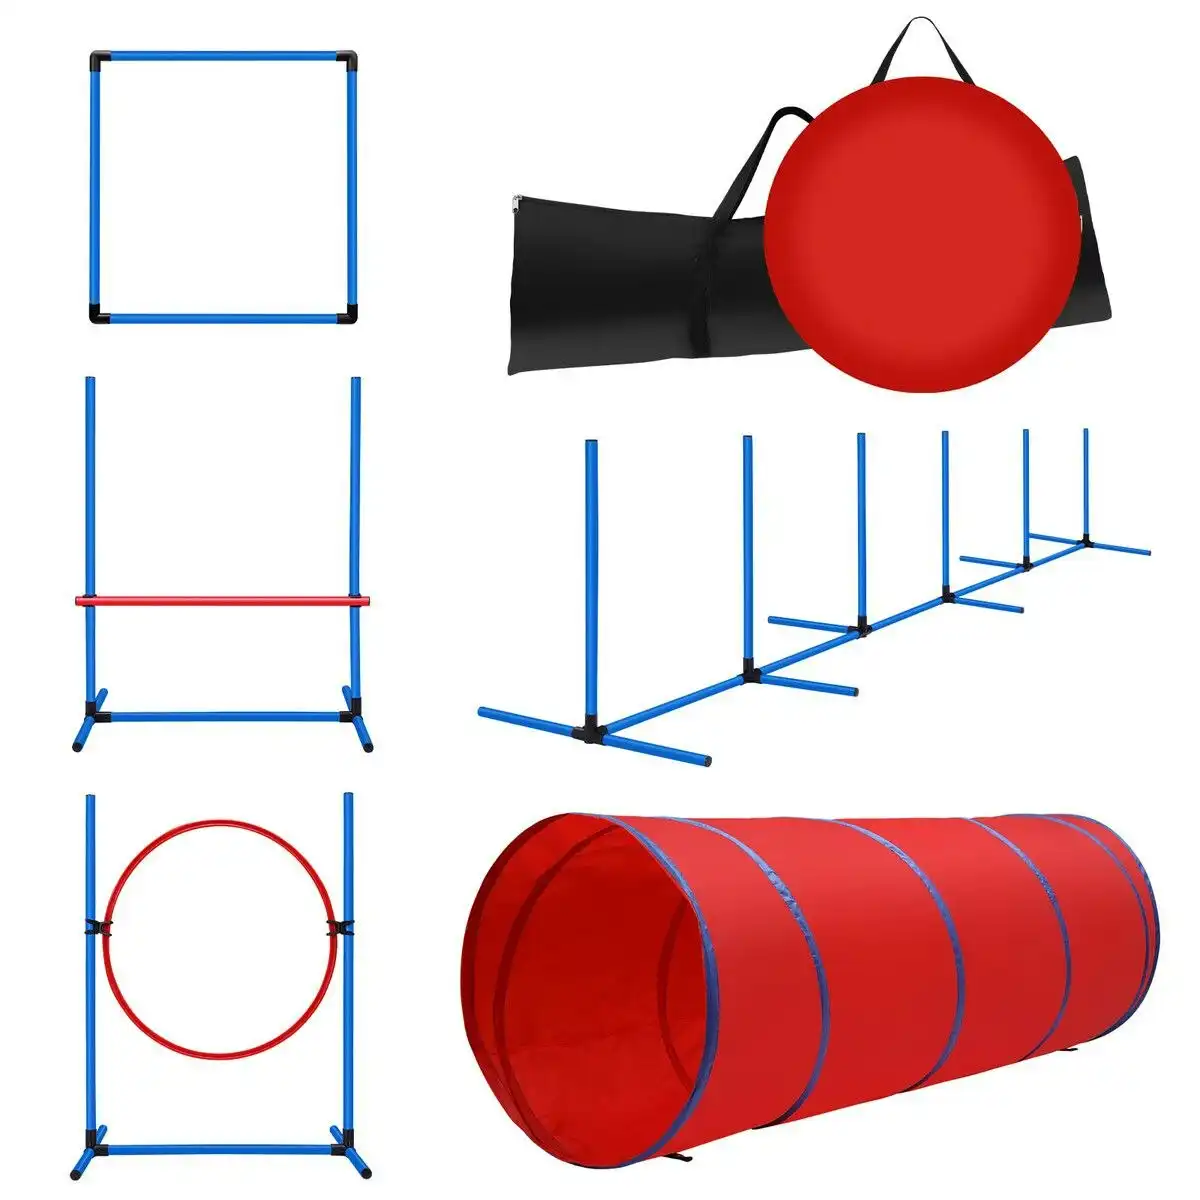 Pet Scene Petscene Dog Agility Equipment 5PC Set Obstacle Course Pet Training Kit Supplies Jump Hurdle Tunnel Poles Pause Box Carrying Bags